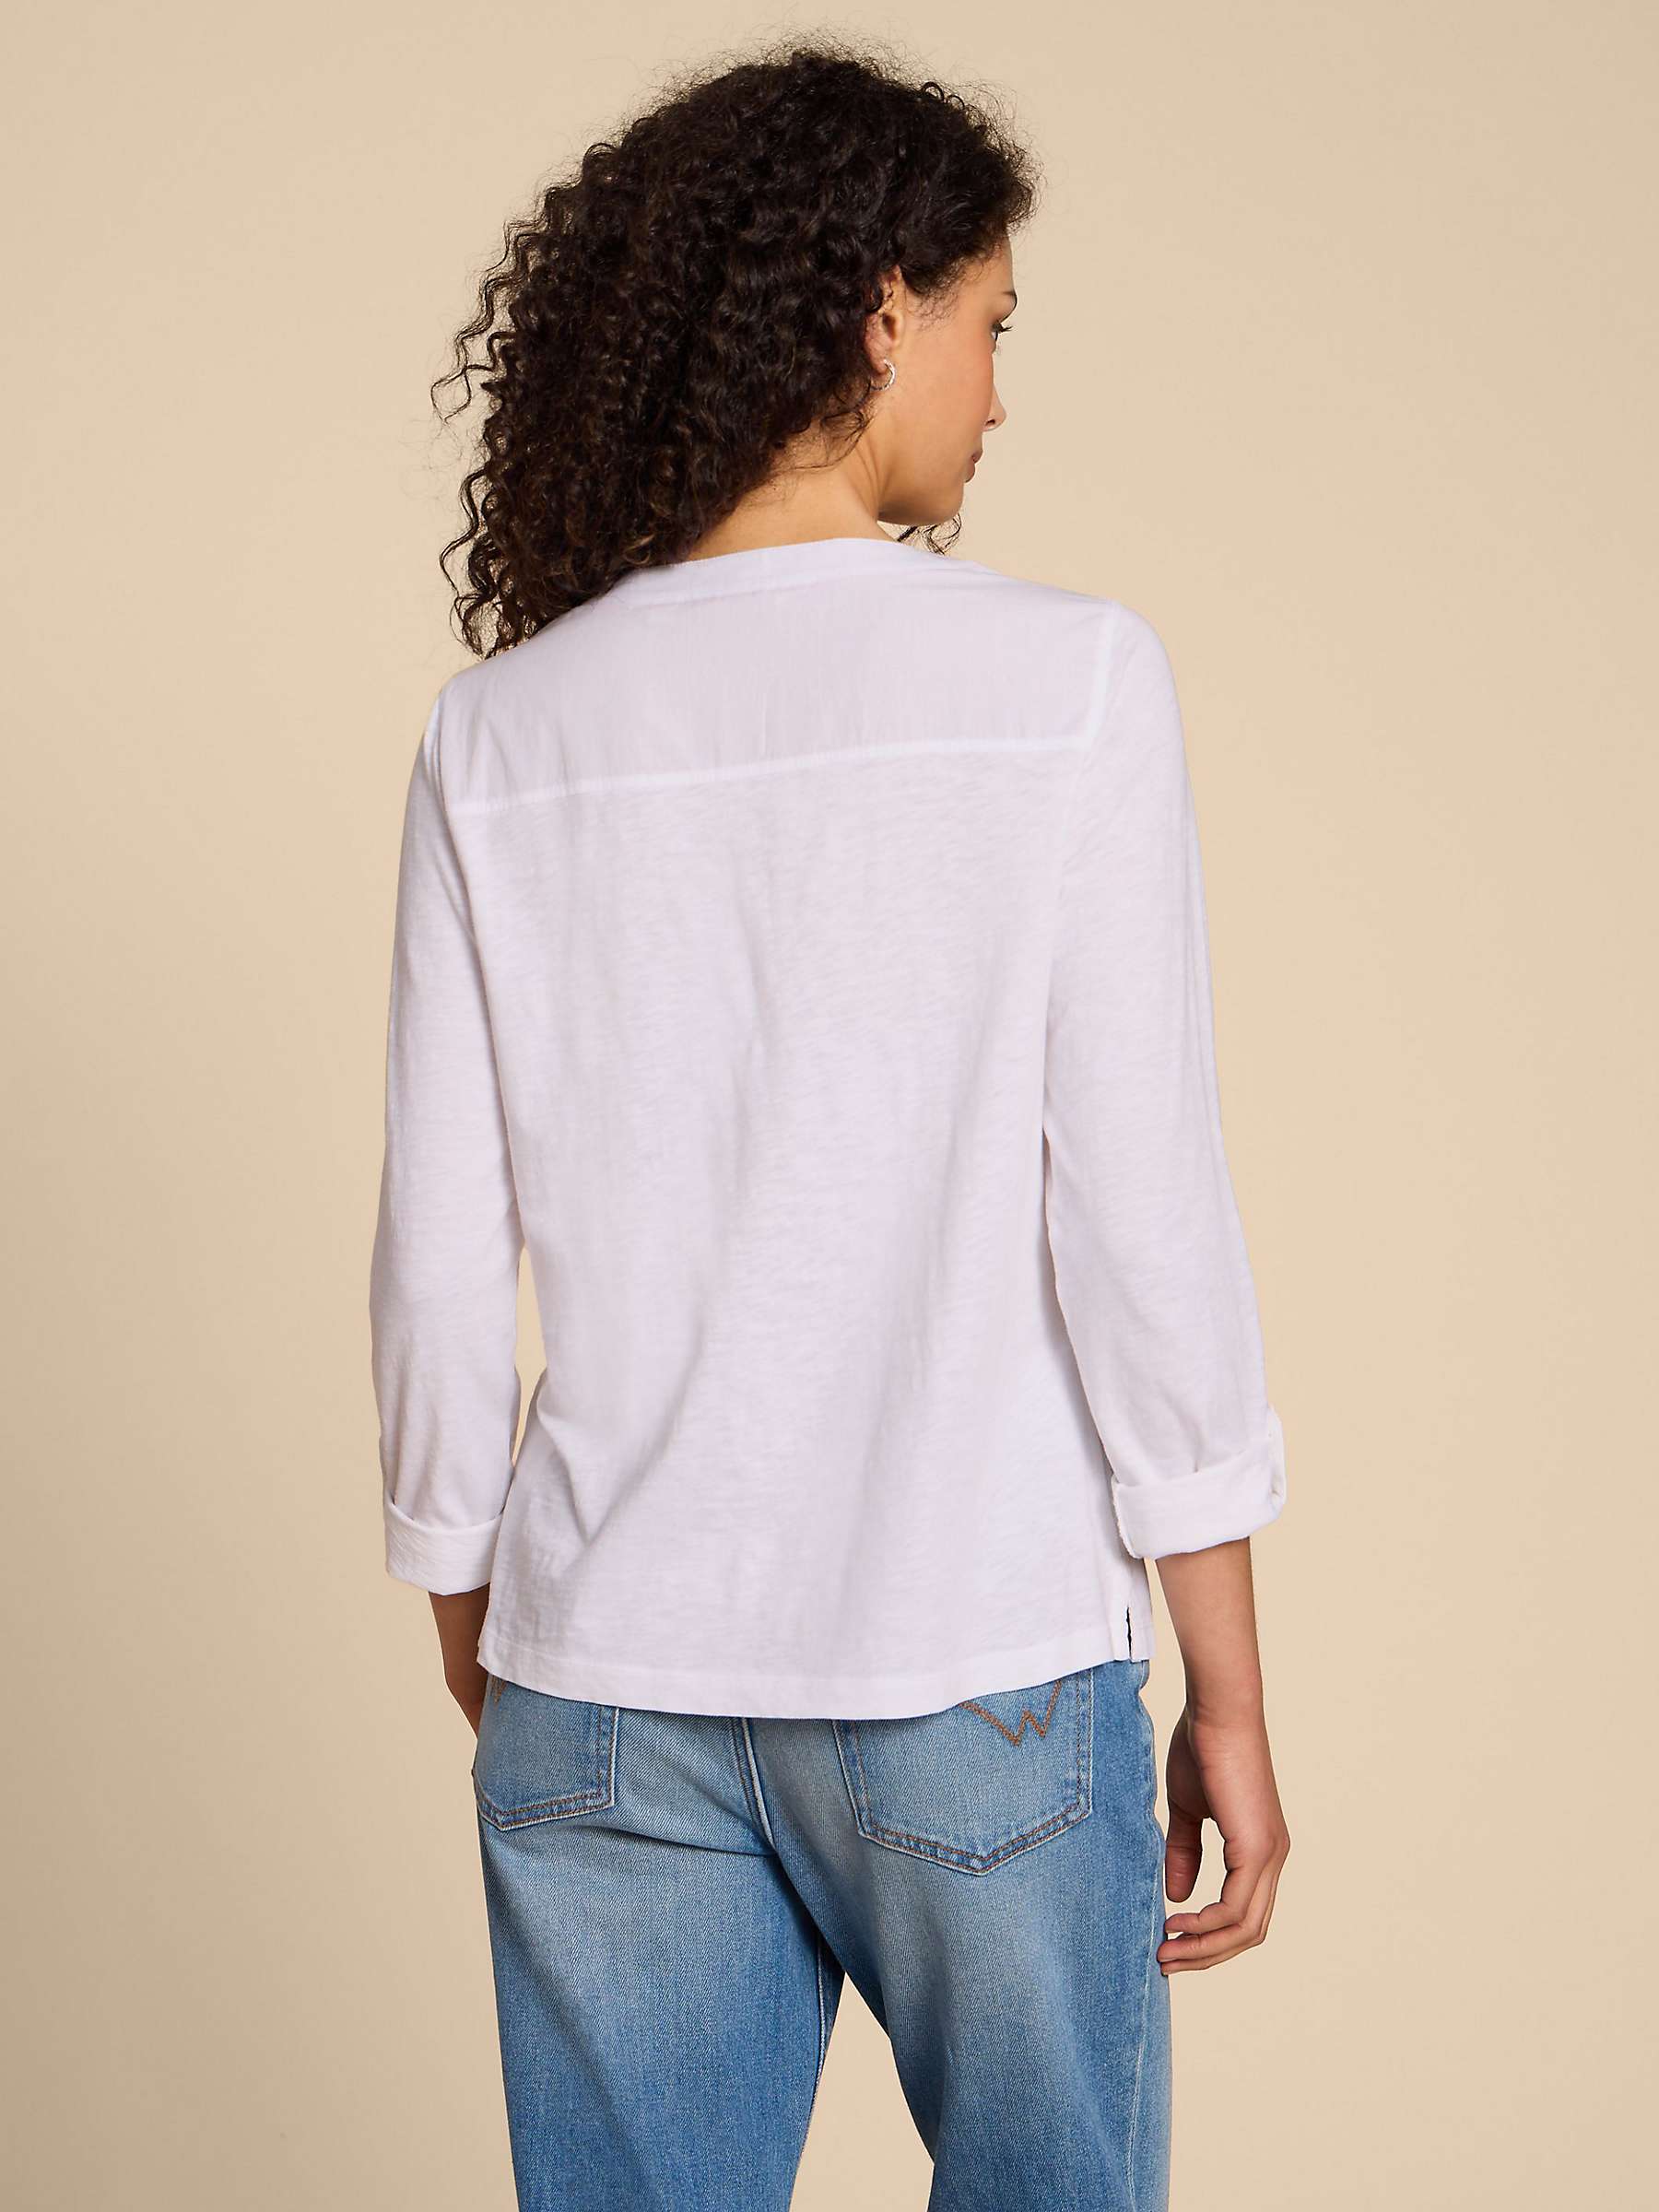 Buy White Stuff Macley Mix Cotton Shirt, Pale Ivory Online at johnlewis.com